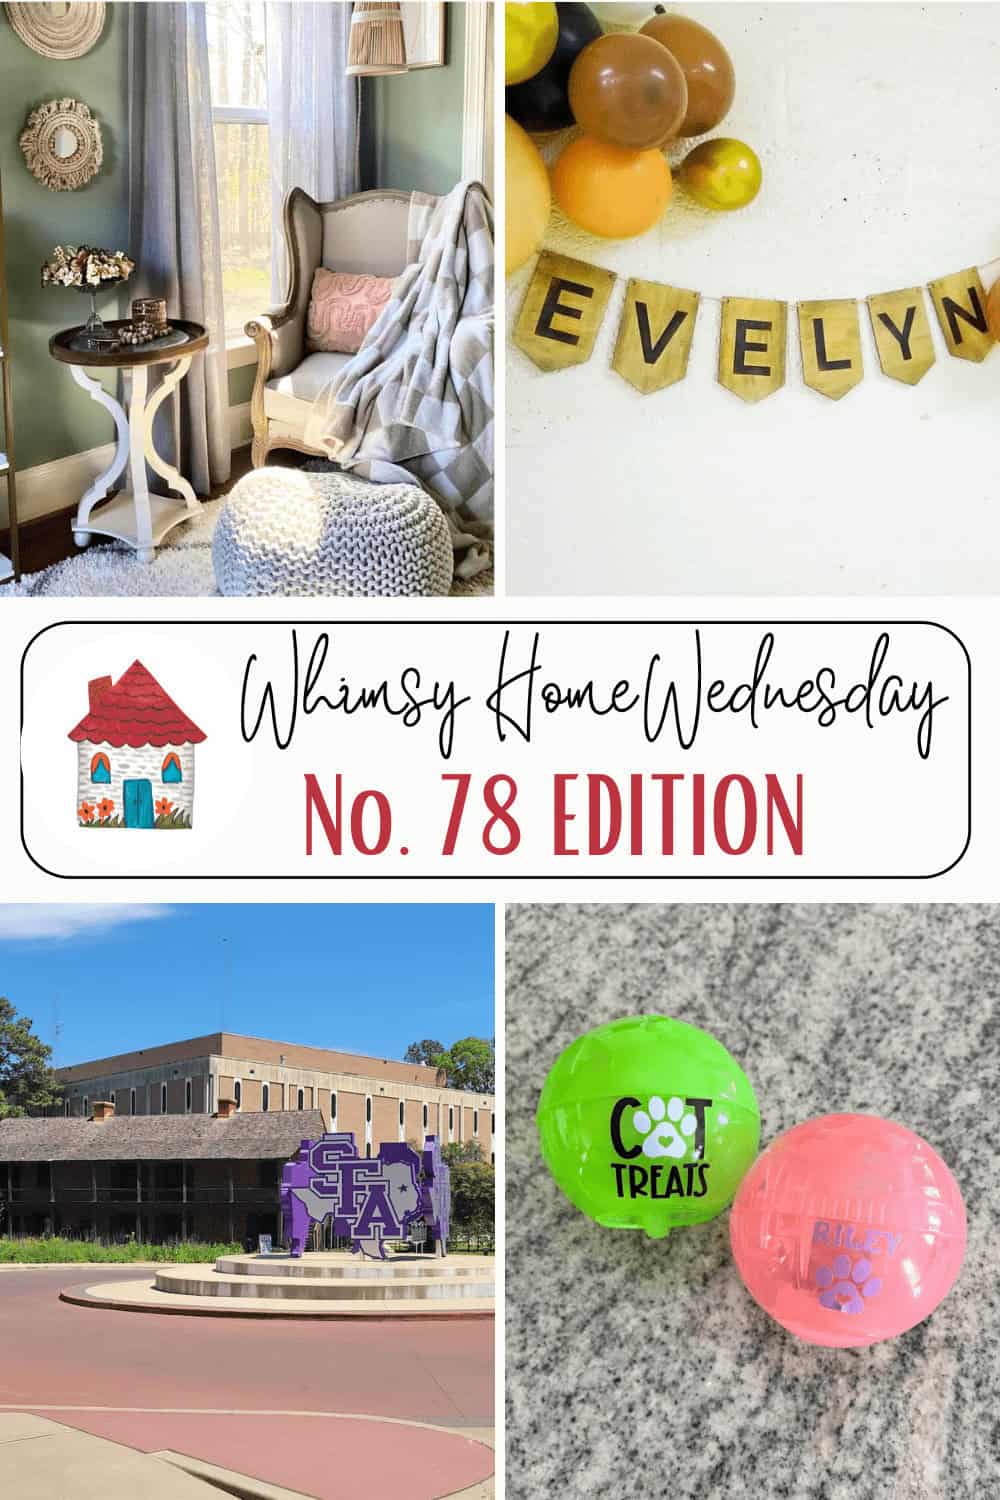 Collage of four images: a cozy reading nook, beaded name "evelyn", whimsical graphic "whimsy home wednesday no. 78 edition", and two colorful toy capsules.